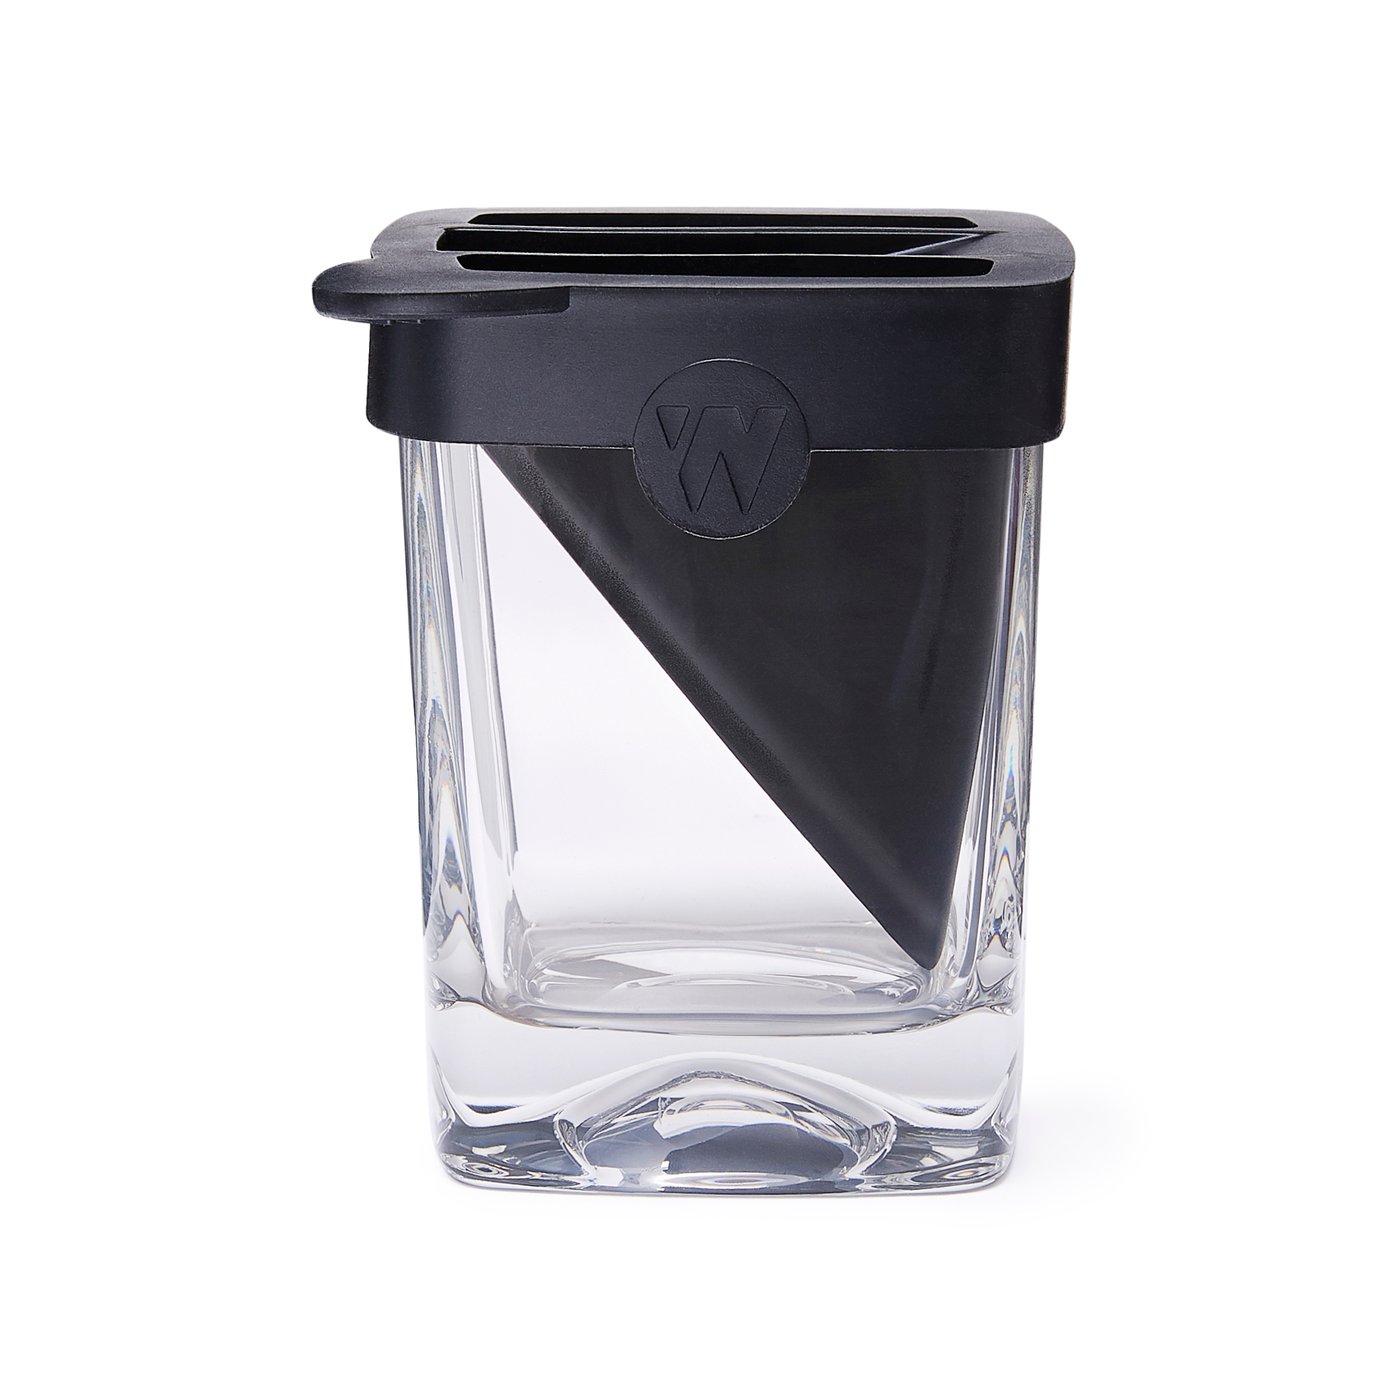 Corkcicle Whiskey Wedge Glass | goop